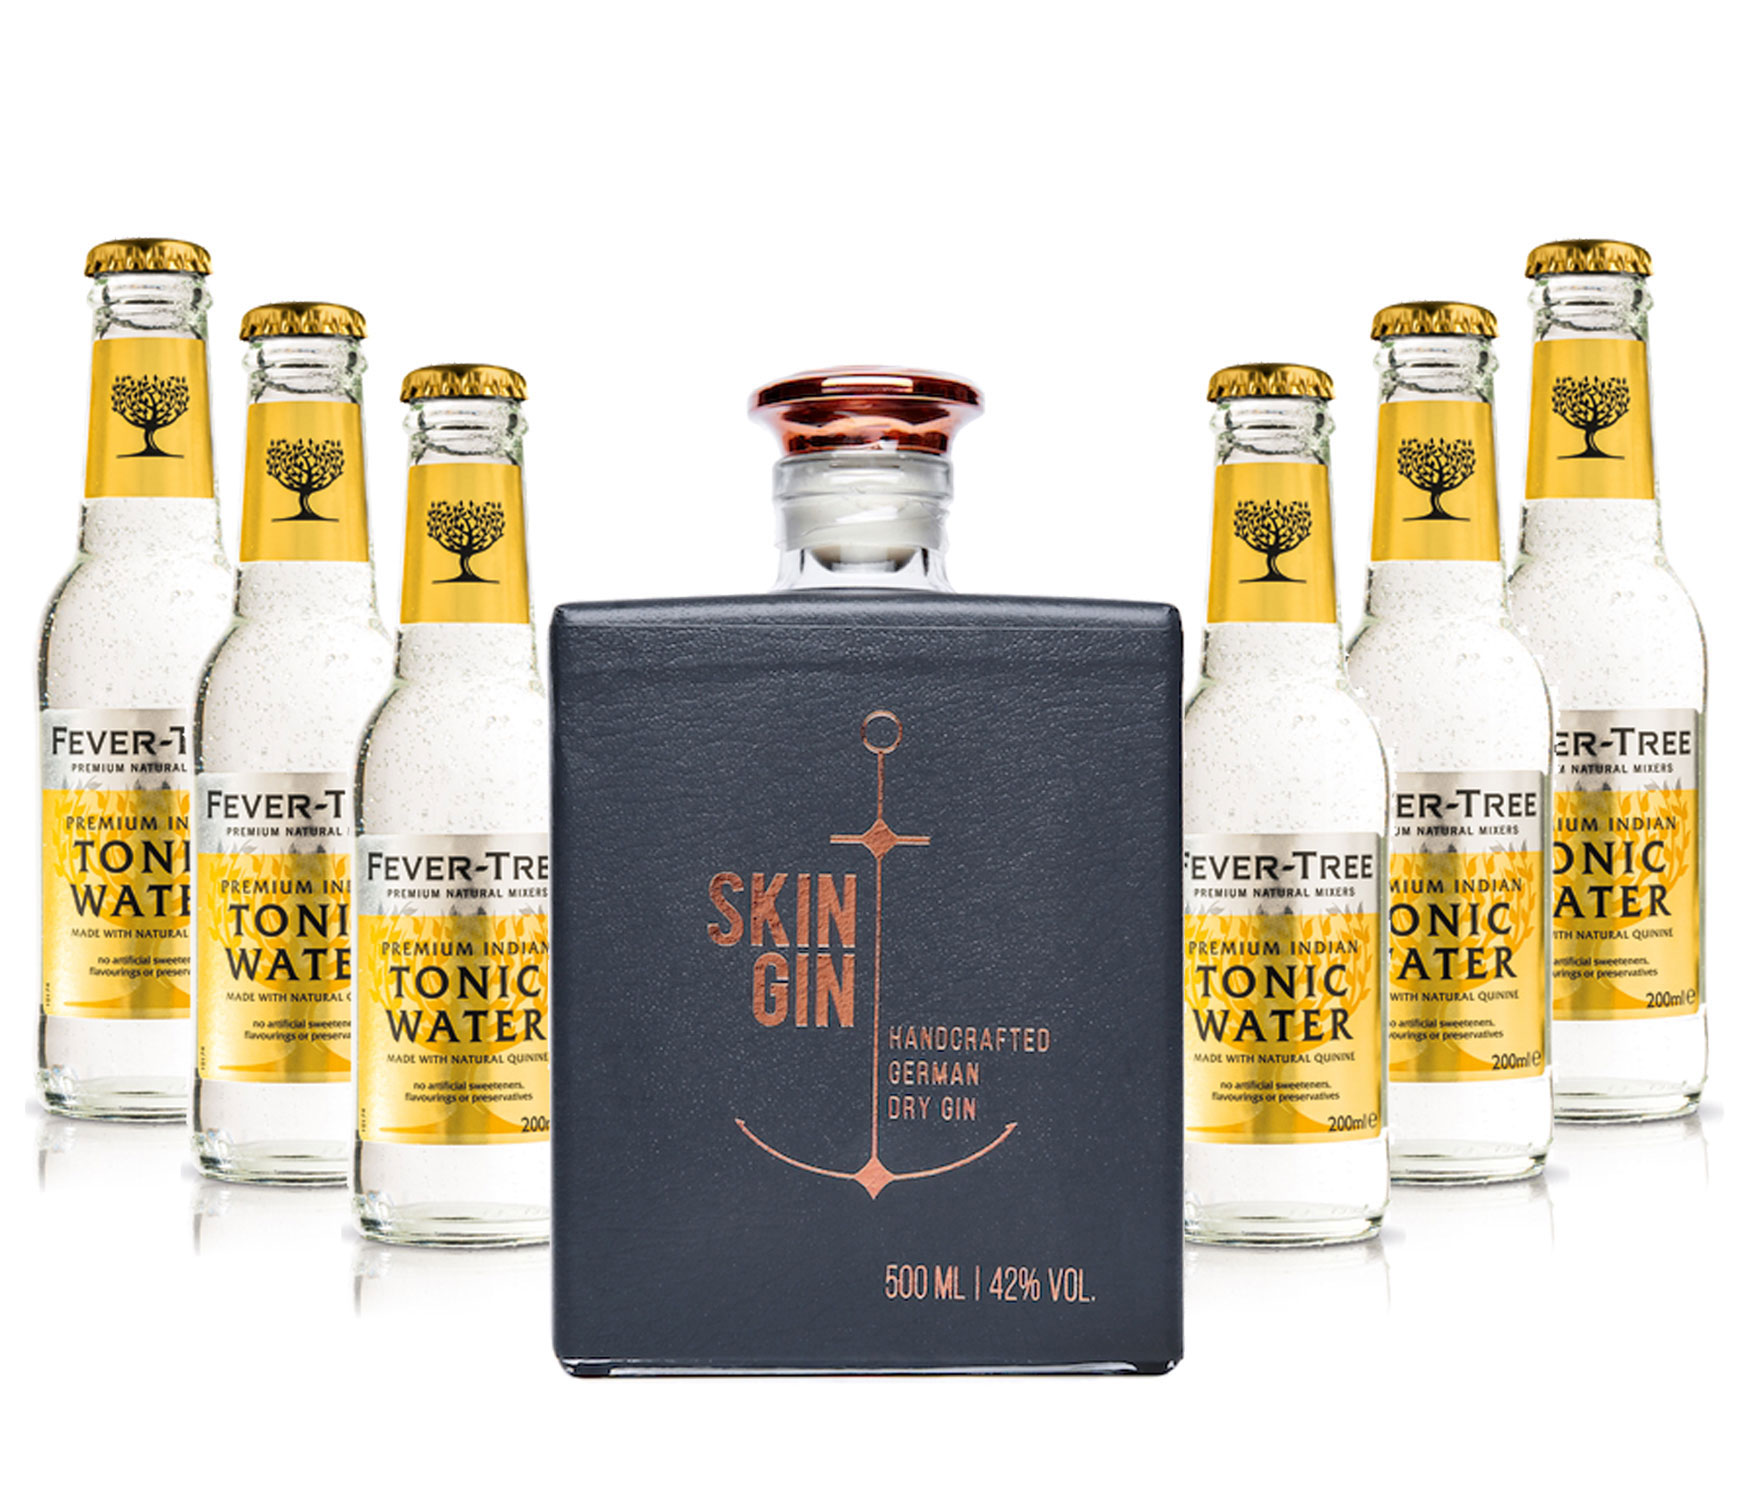 Gin Tonic Set - Skin Gin German Handcrafted Dry Gin 50cl (42% Vol) + 6x Fever Tree Tonic Water 200ml inkl. Pfand MEHRWEG -[Enthält Sulfite]